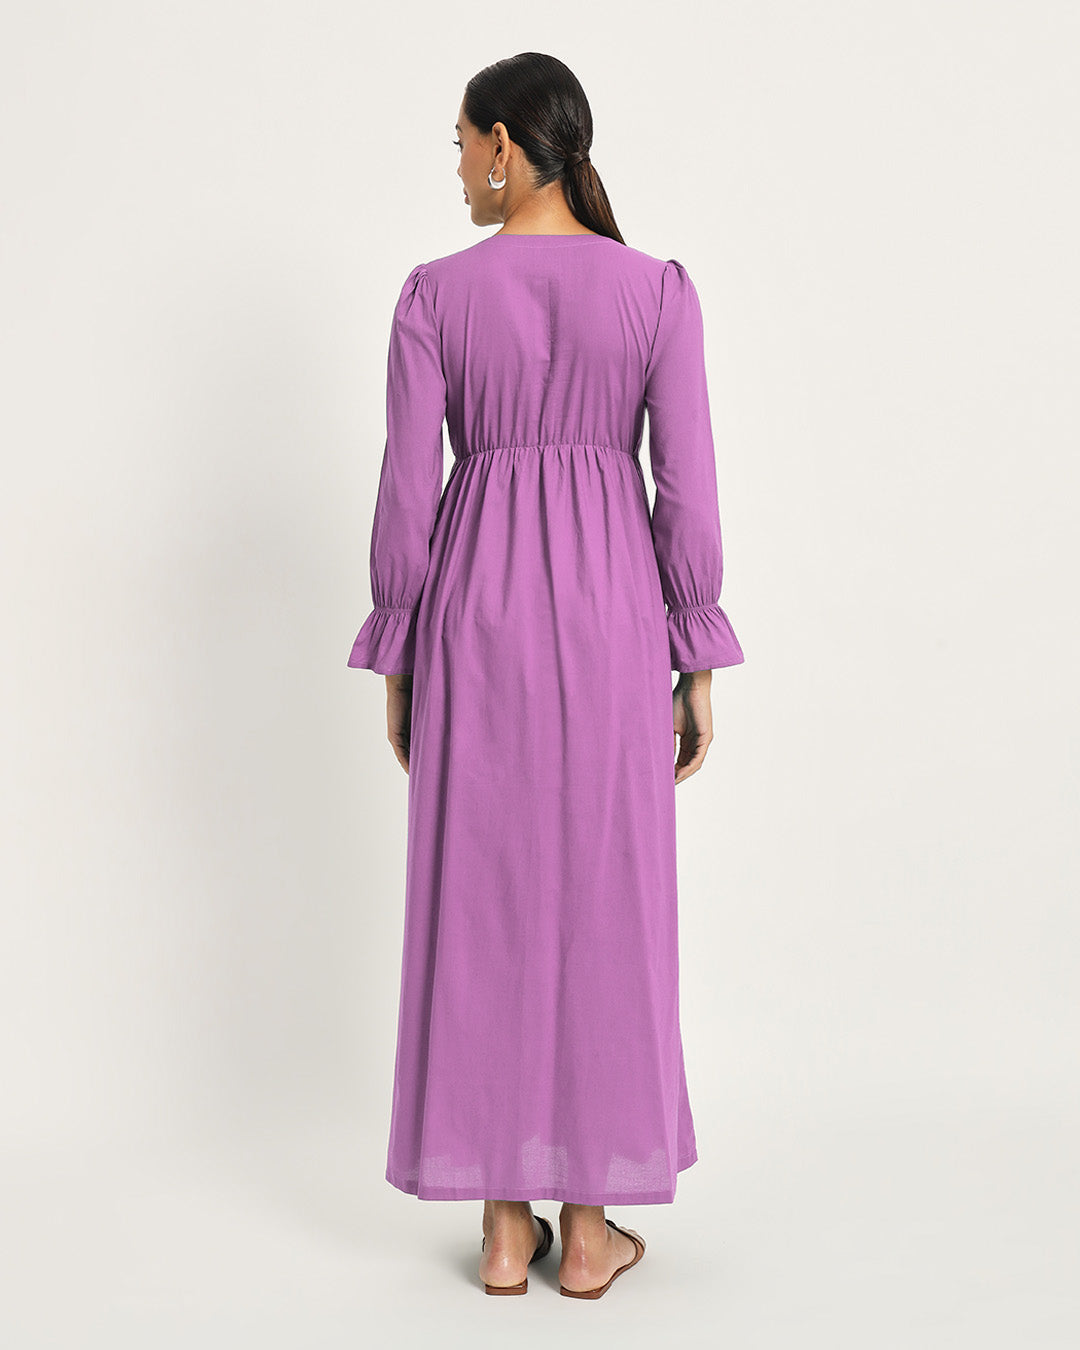 Combo: Russet Red & Wisteria Purple Day-Night Ease Nightdress